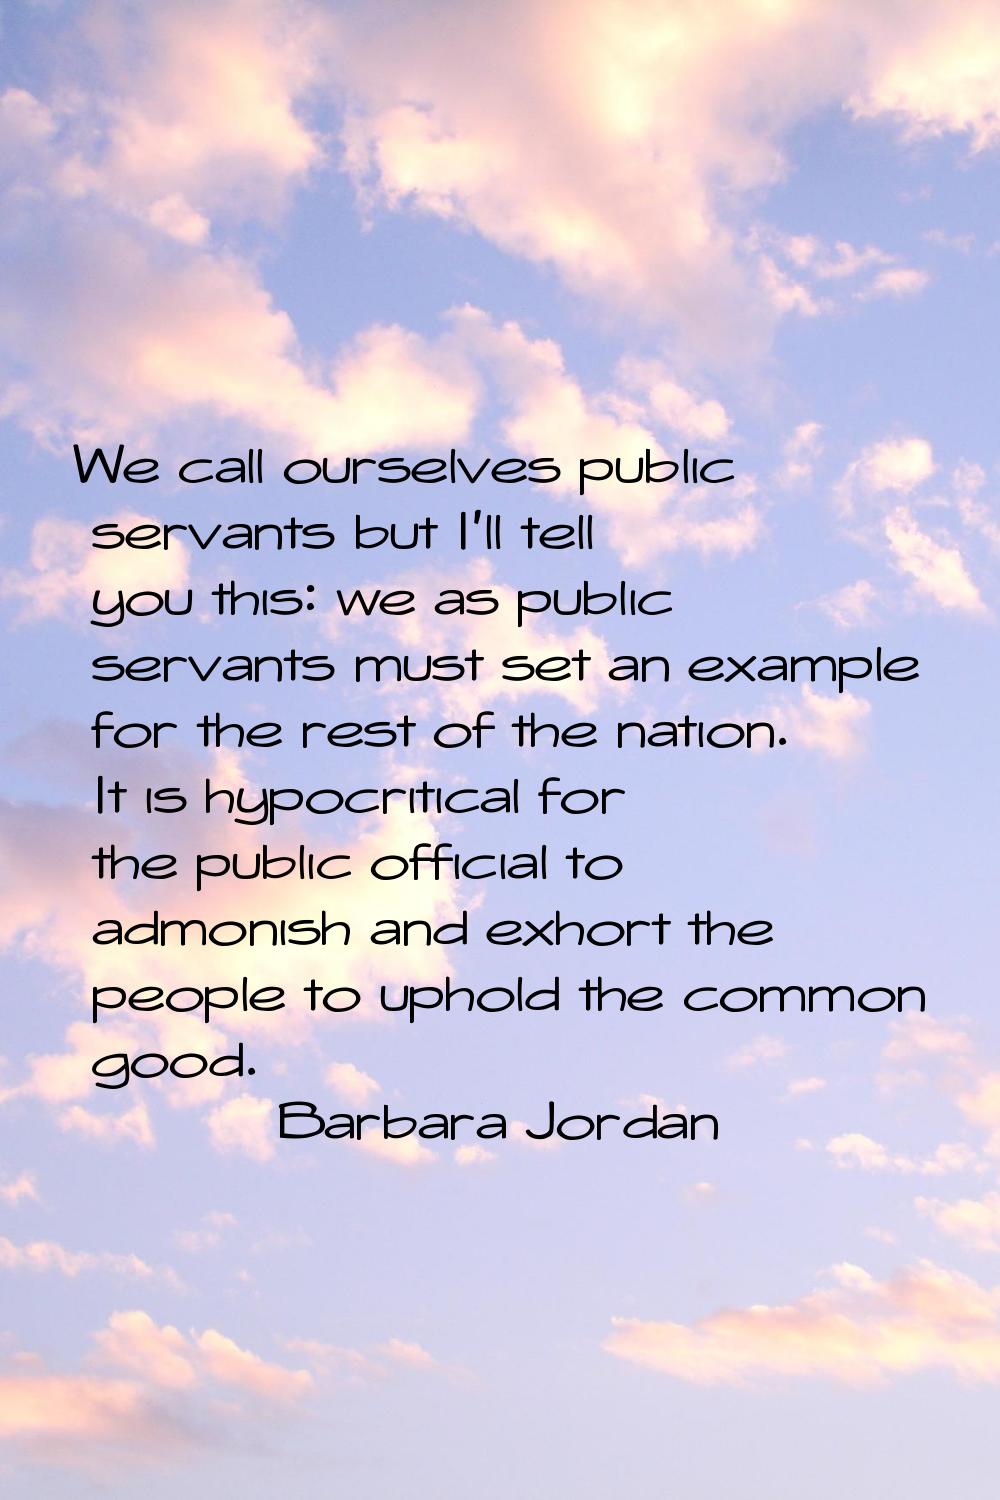 We call ourselves public servants but I'll tell you this: we as public servants must set an example